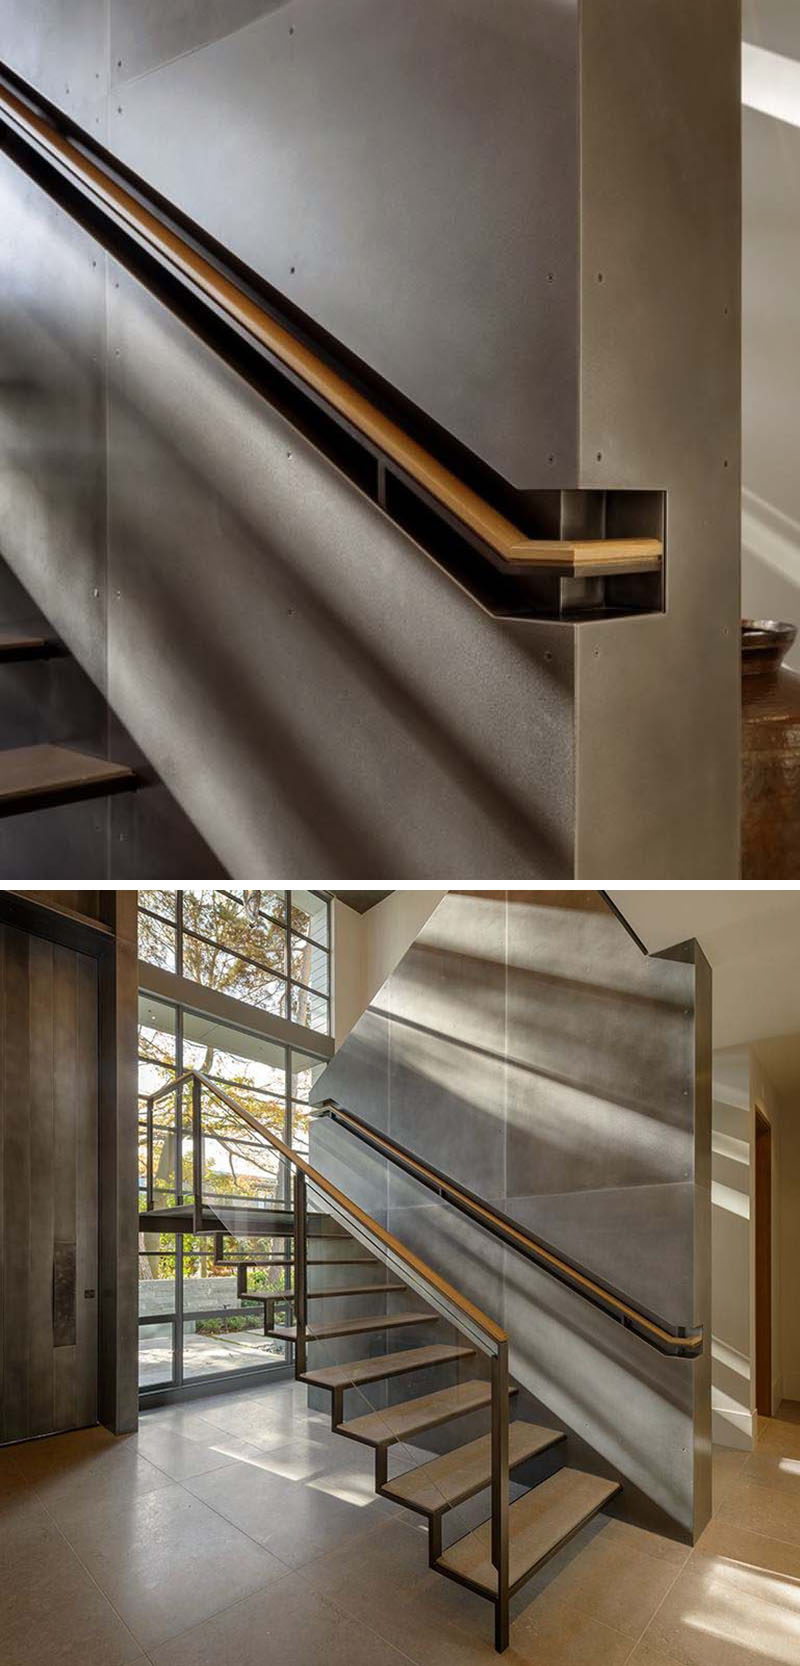 Stair Design Idea - 9 Examples Of Built-In Handrails // This wood and steel handrail is built into a section of the wall for a more industrial look.